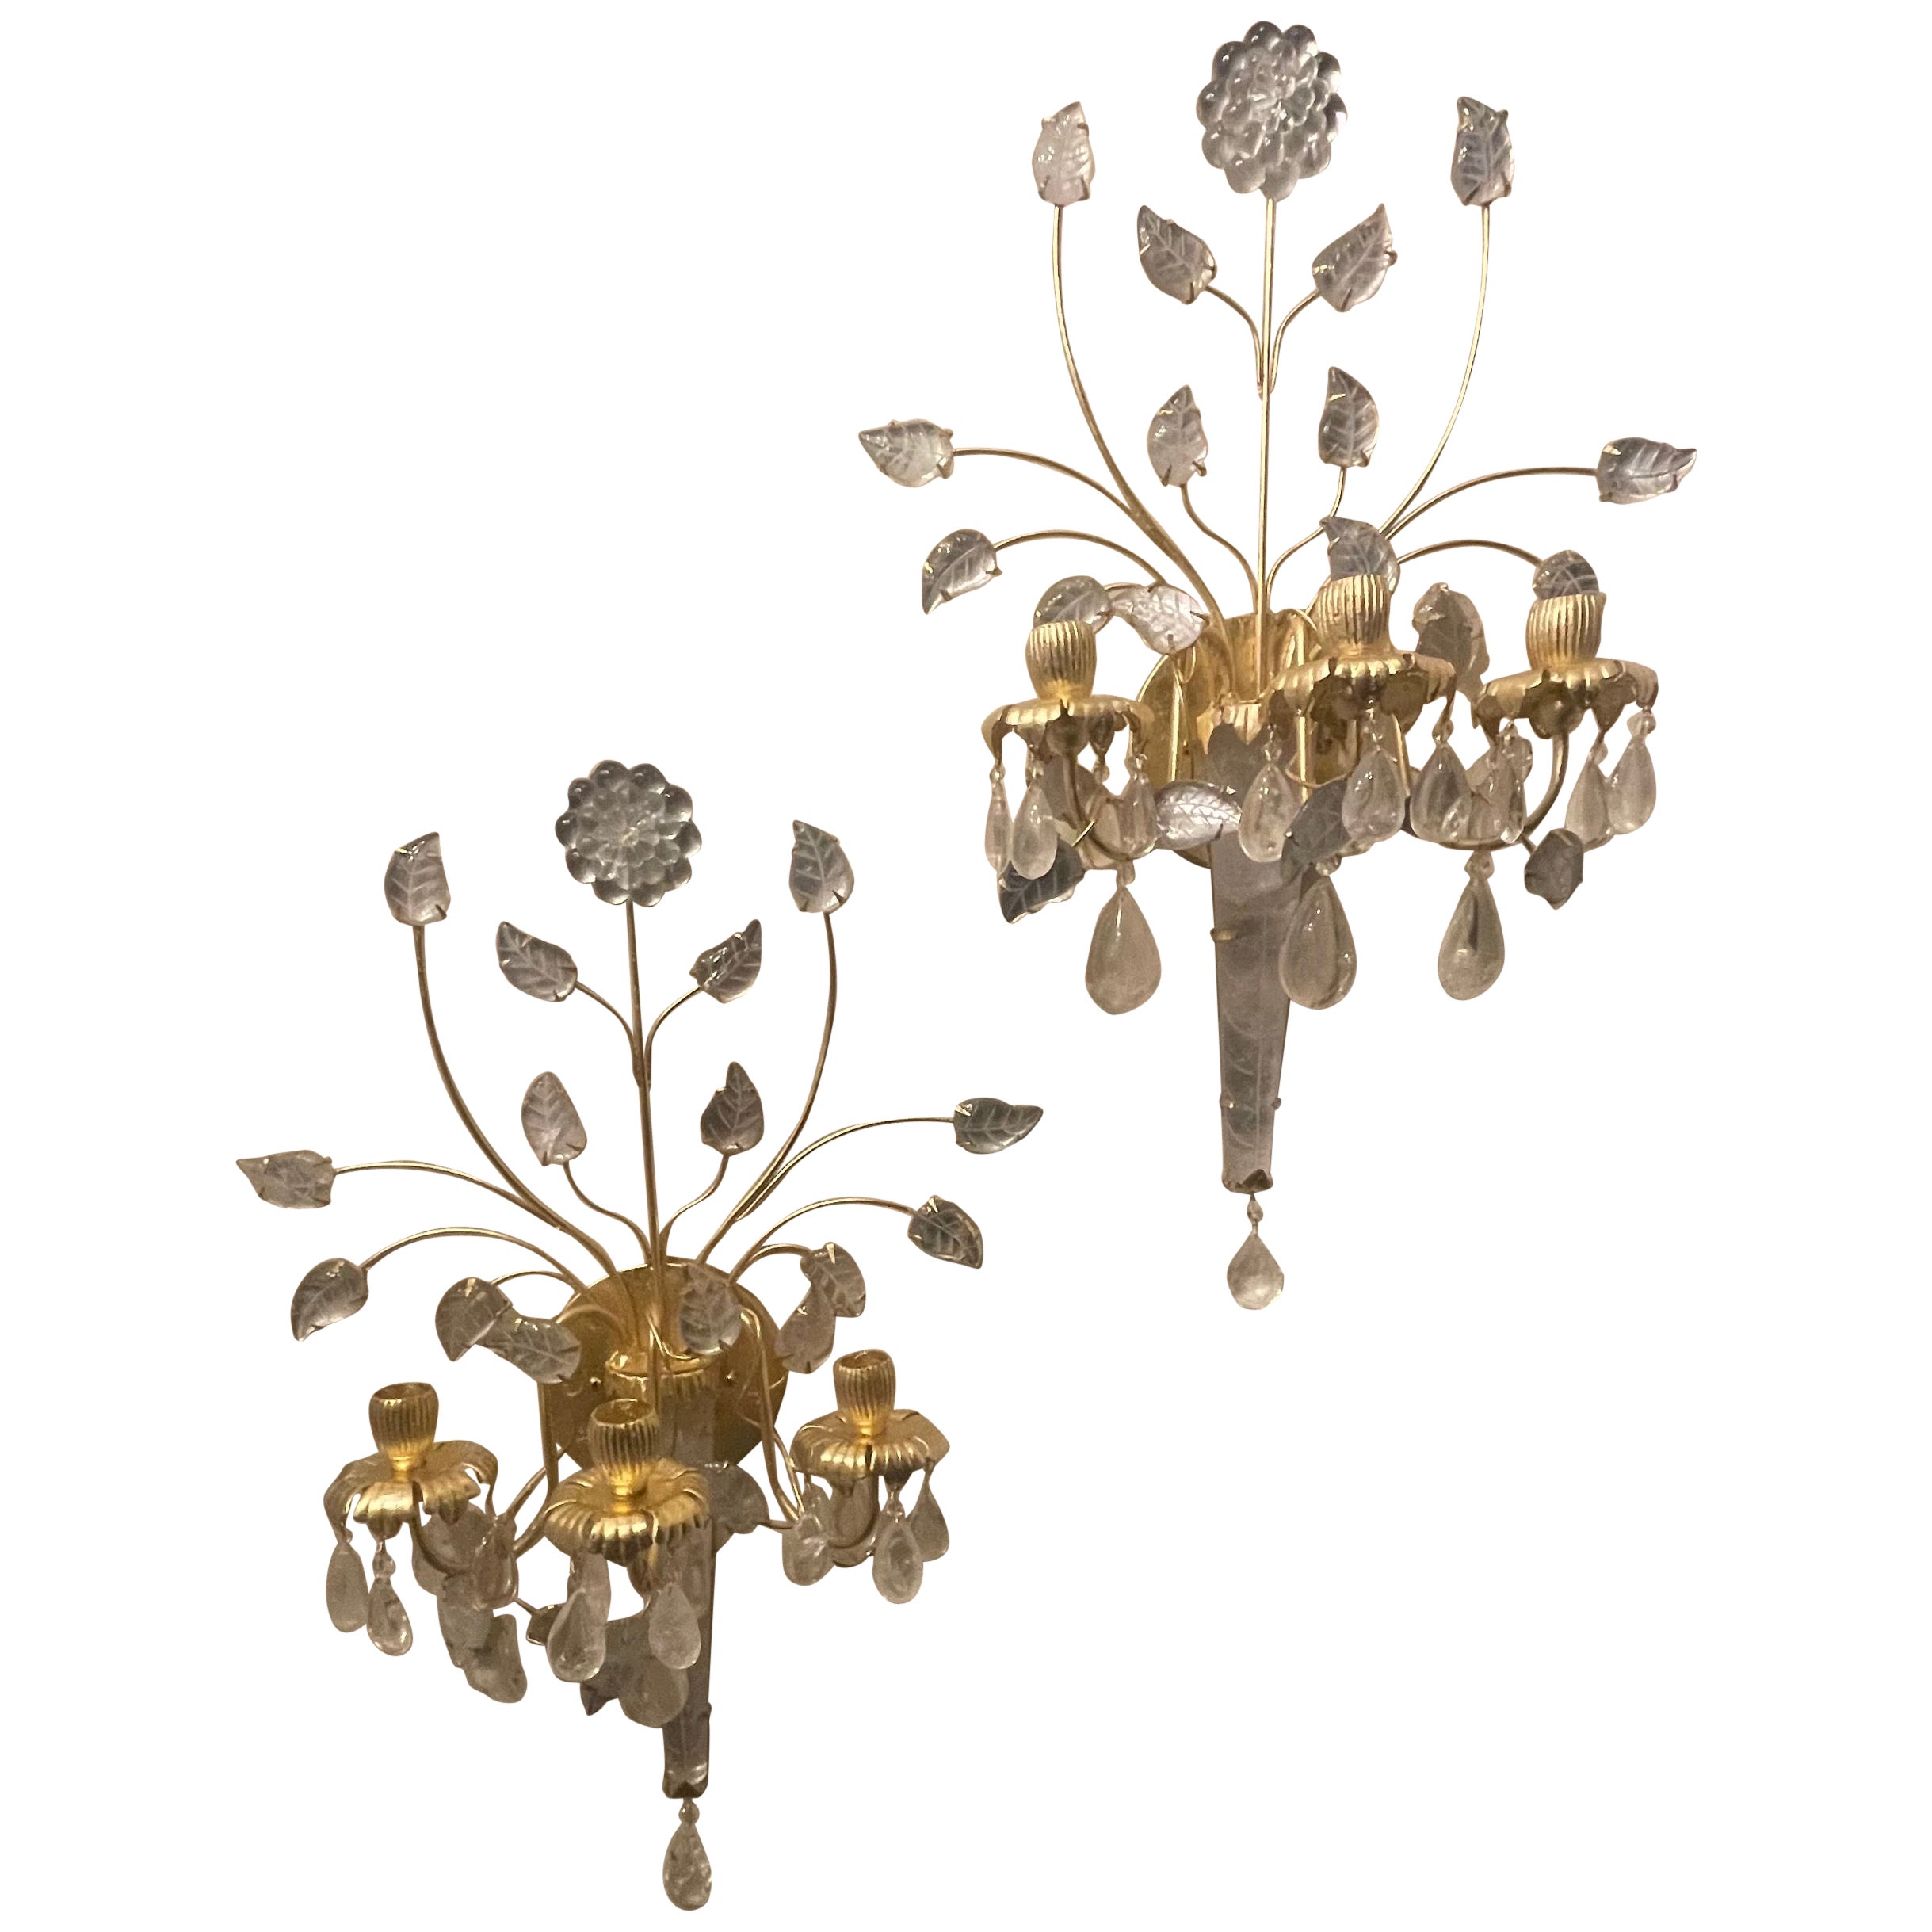 A Wonderful Pair Of Maison Baguès Style Rock Crystal With Flowers & Leaf Spray Bouquet With A Gold Leaf Gilt Finish, Each Of The Sconces Having 3 Candelabra Sockets, Newly Electrified.